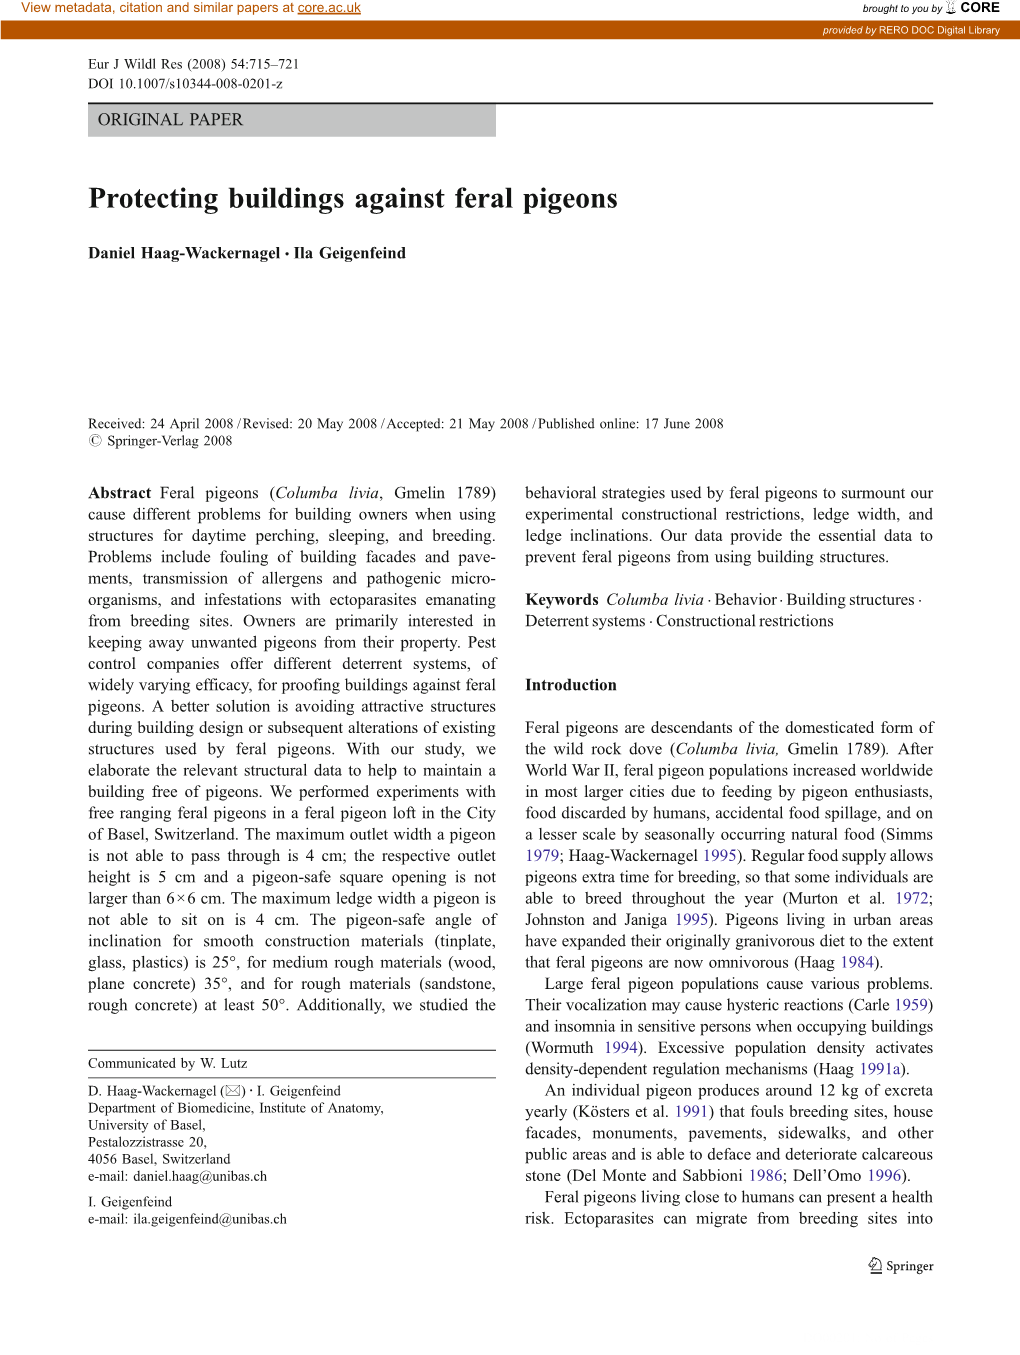 Protecting Buildings Against Feral Pigeons